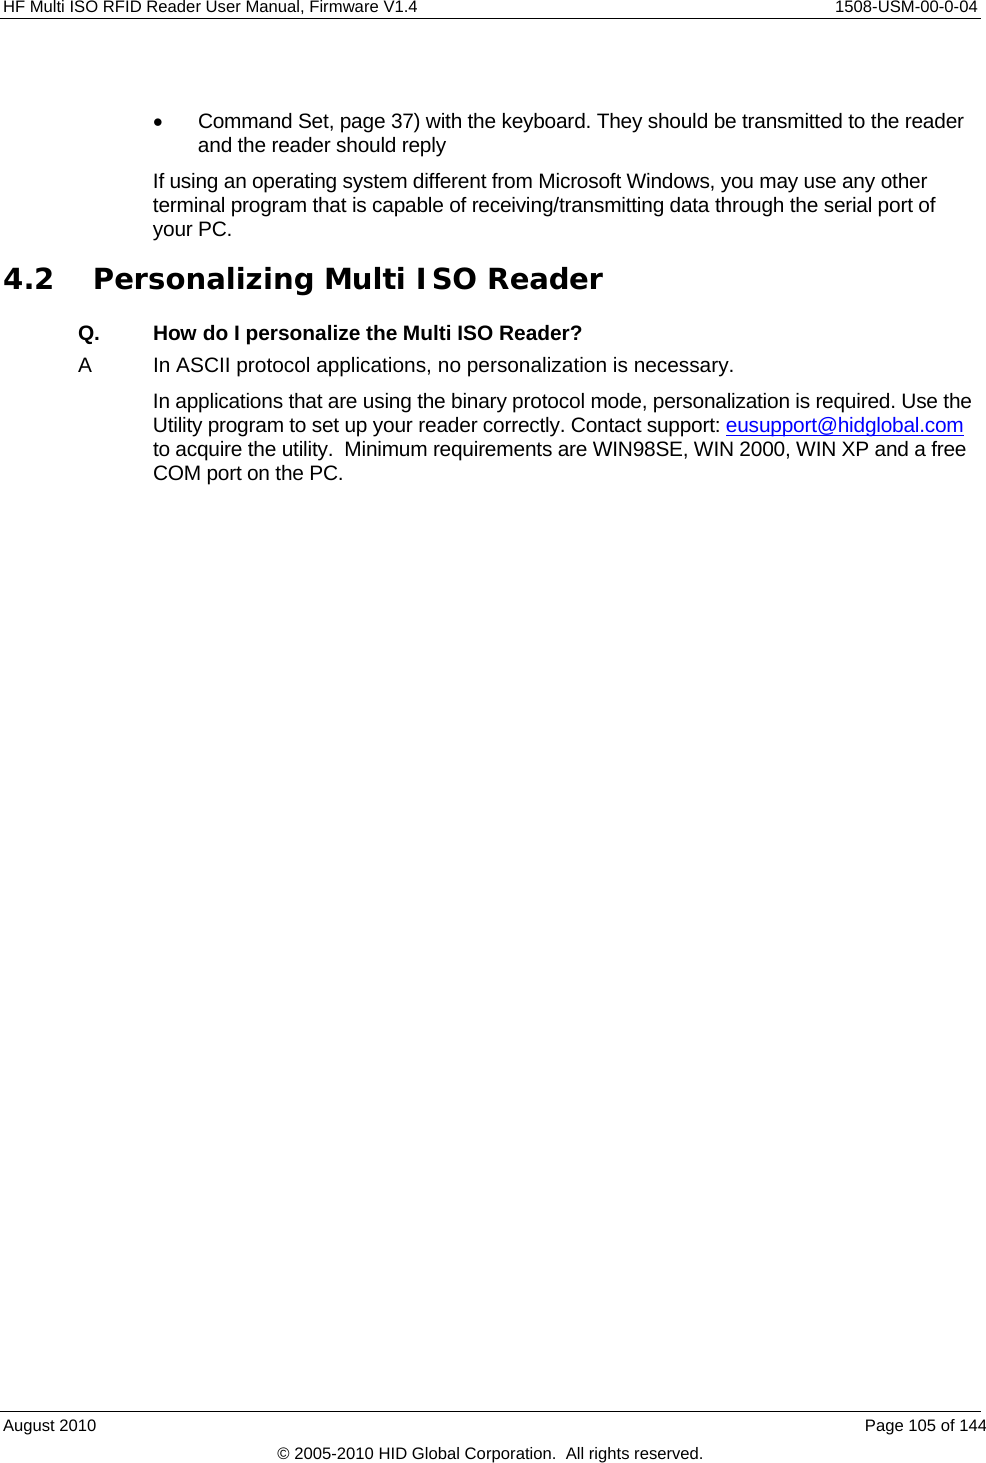  HF Multi ISO RFID Reader User Manual, Firmware V1.4    1508-USM-00-0-04   Command Set, page 37) with the keyboard. They should be transmitted to the reader and the reader should reply If using an operating system different from Microsoft Windows, you may use any other terminal program that is capable of receiving/transmitting data through the serial port of your PC. 4.2 Personalizing Multi ISO Reader Q.  How do I personalize the Multi ISO Reader? A  In ASCII protocol applications, no personalization is necessary. In applications that are using the binary protocol mode, personalization is required. Use the Utility program to set up your reader correctly. Contact support: eusupport@hidglobal.com to acquire the utility.  Minimum requirements are WIN98SE, WIN 2000, WIN XP and a free COM port on the PC.  August 2010    Page 105 of 144 © 2005-2010 HID Global Corporation.  All rights reserved. 